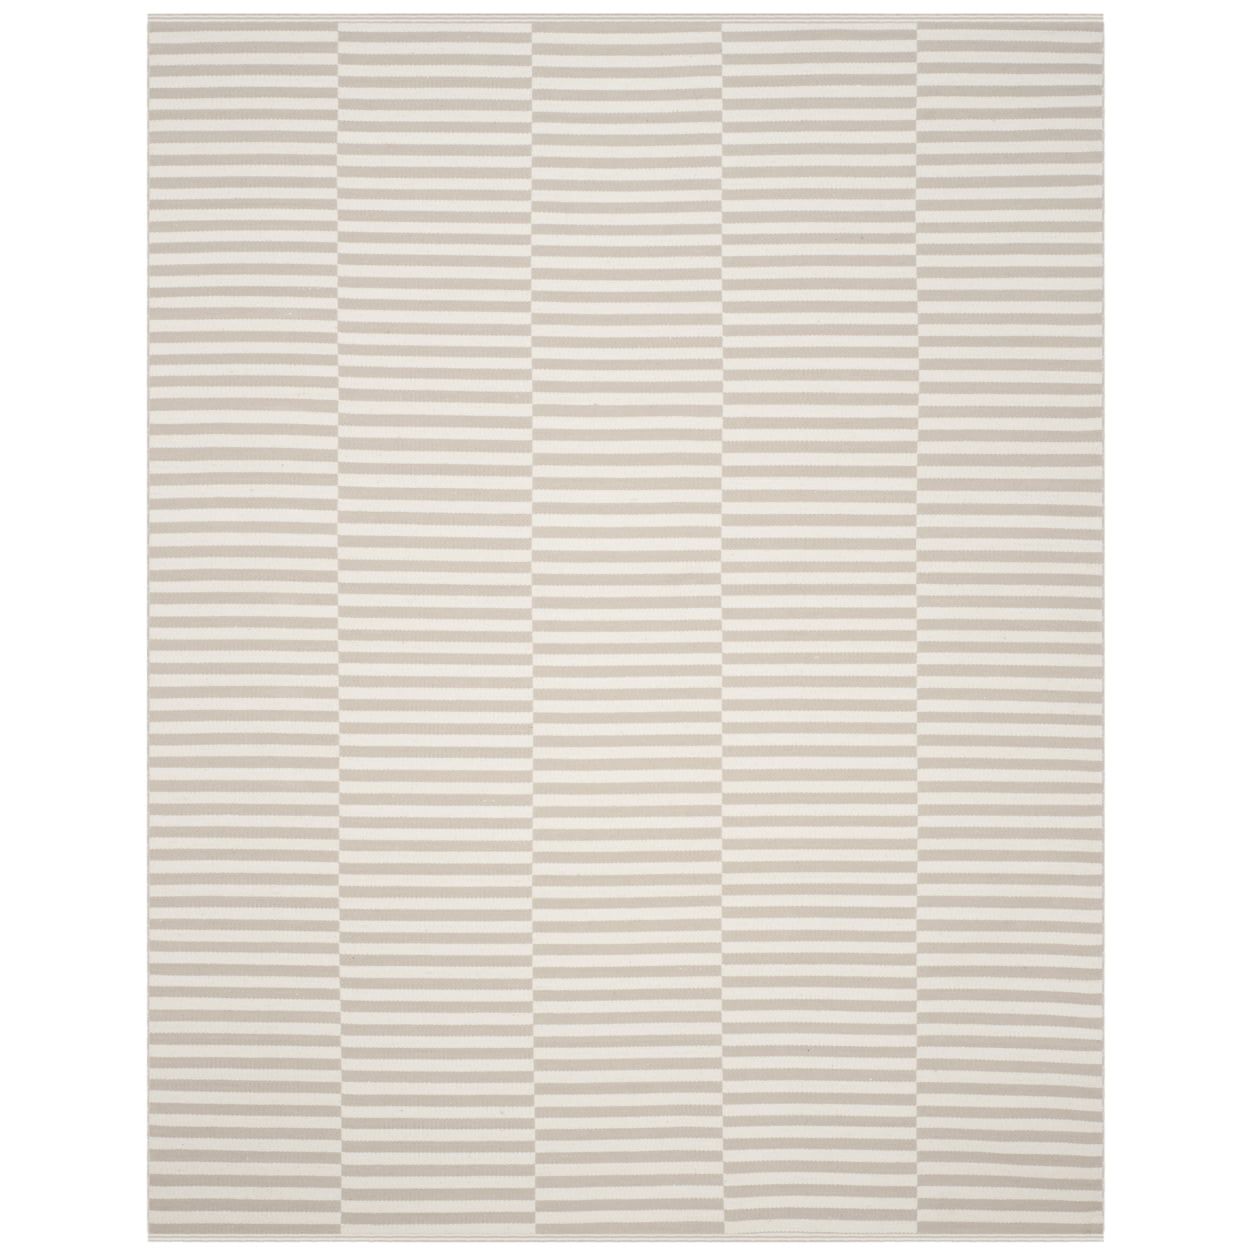 Ivory and Light Grey Striped Cotton 5' x 7' Handmade Reversible Rug